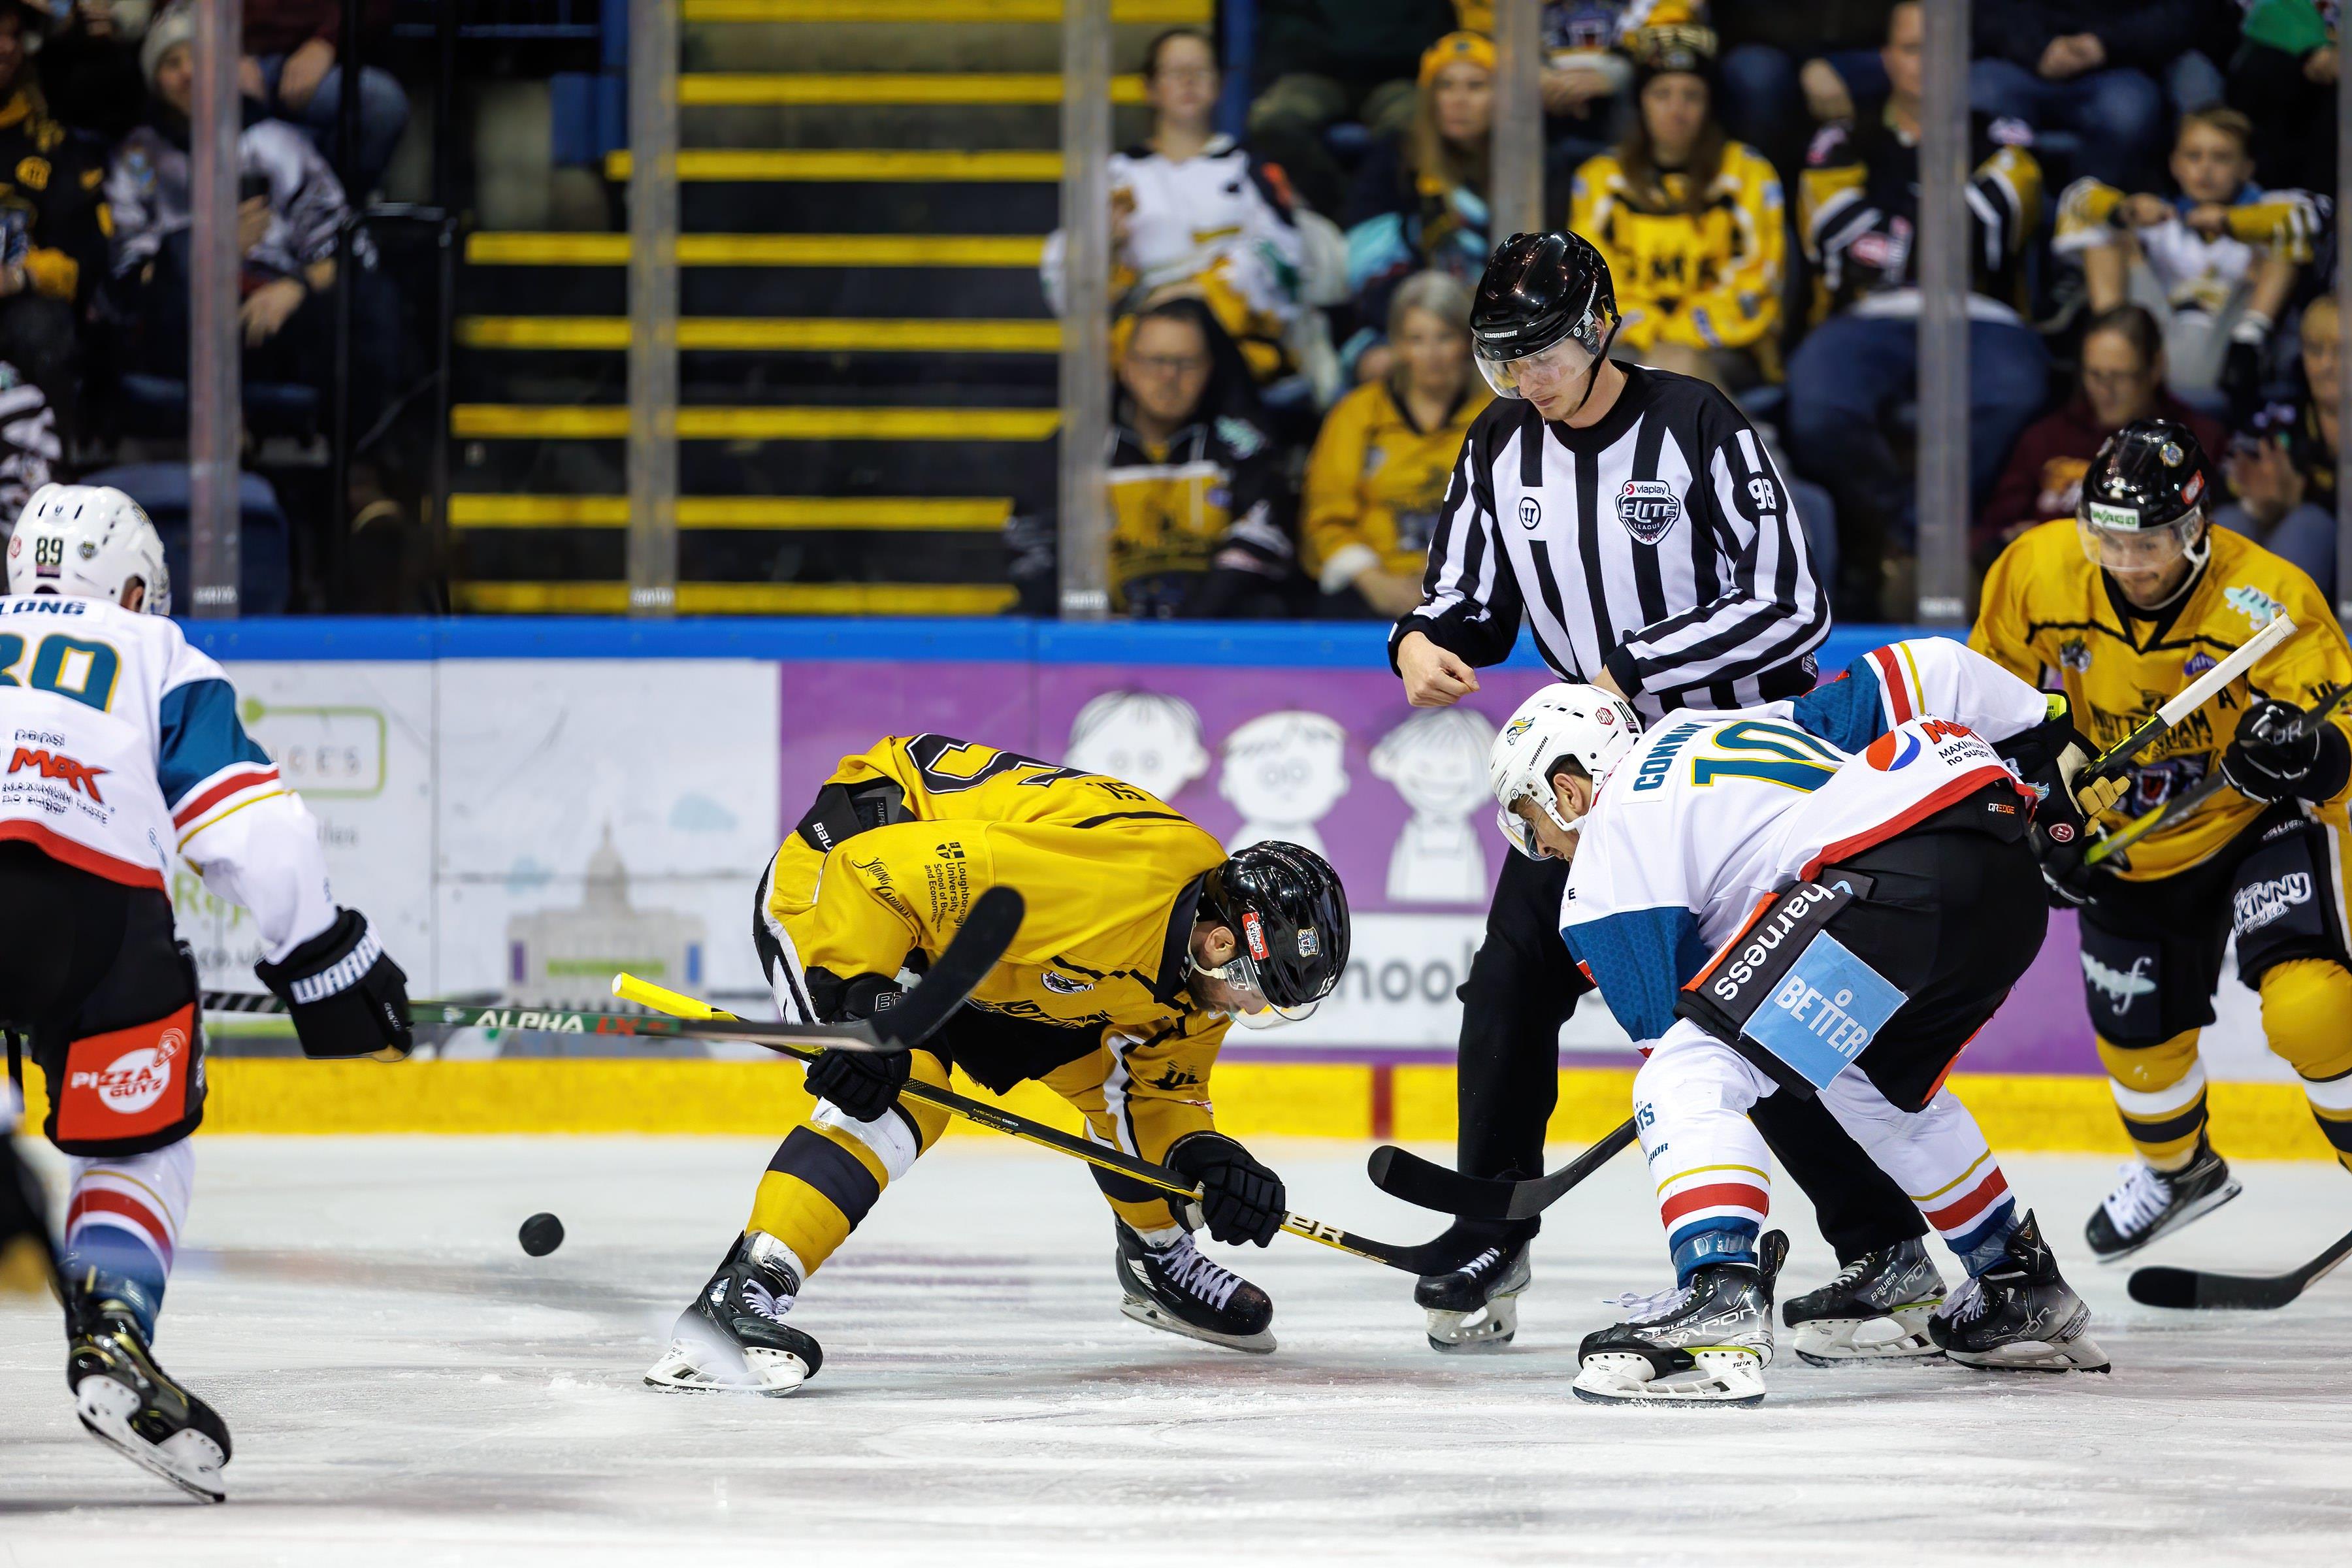 PANTHERS TO FACE GIANTS IN CUP QUARTER-FINAL Top Image